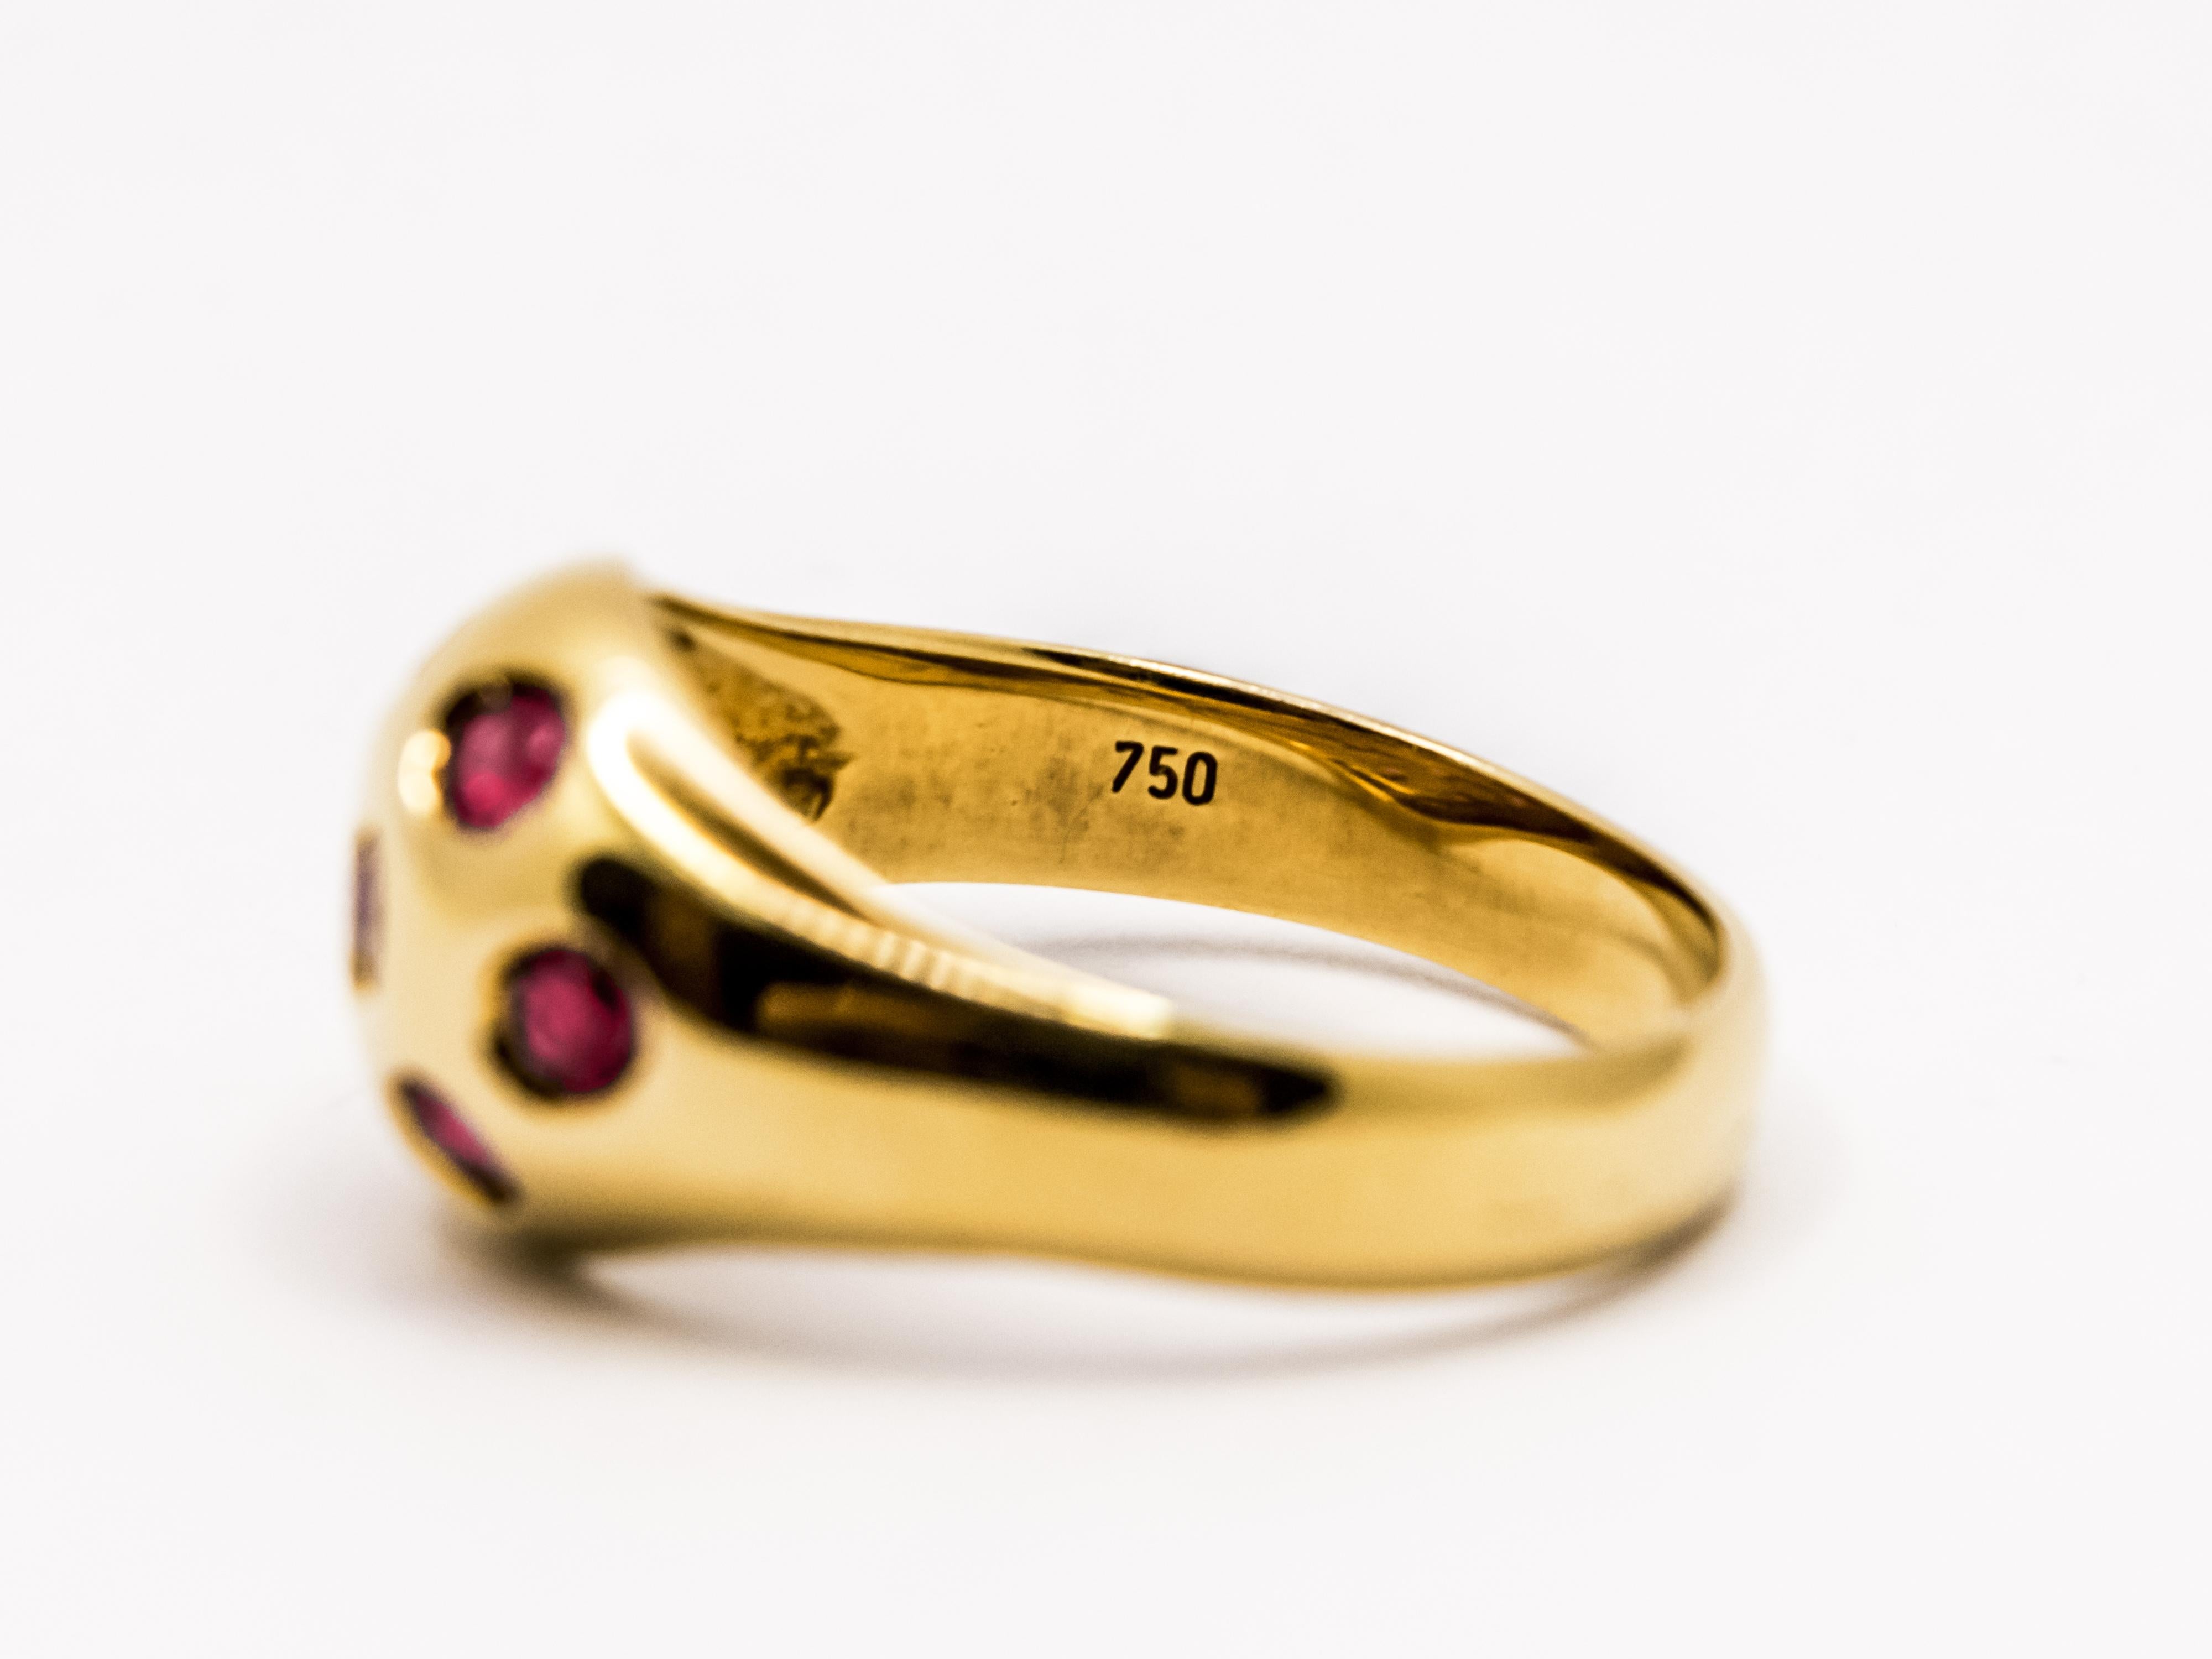 An 18 kt yellow gold ring with an unusual and original design.
It has a 1980s style and is embellished with 7 light red Rubies arranged in a concentric pattern on the top.
The weight of this ring is 5.45 g.
The inside of the band bears the 750 mark